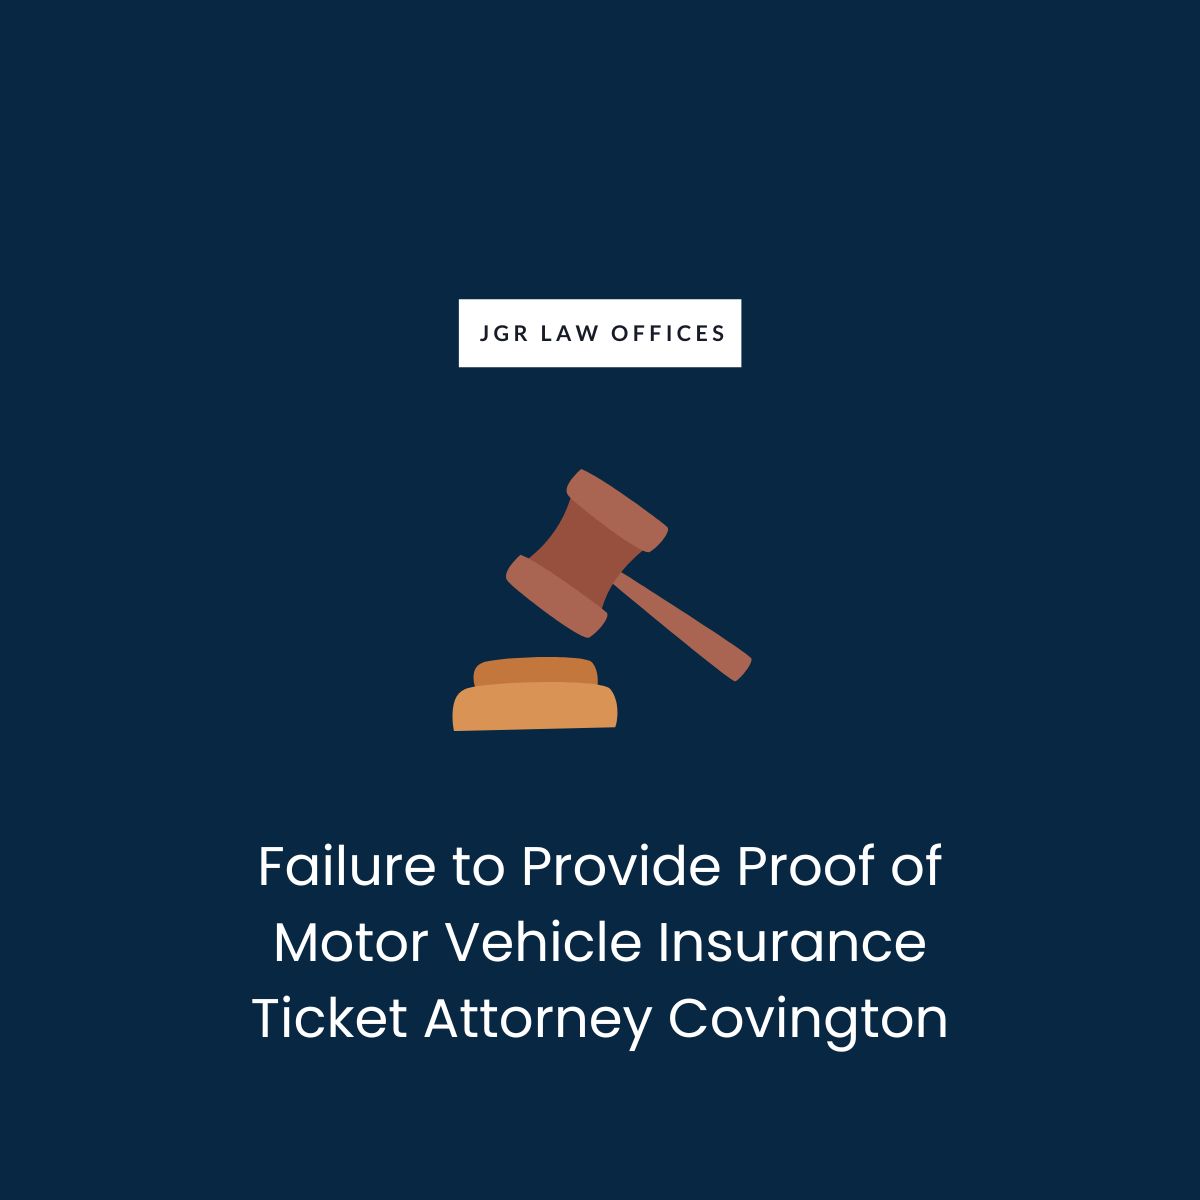 Failure to Provide Proof of Motor Vehicle Insurance Ticket Attorney Covington